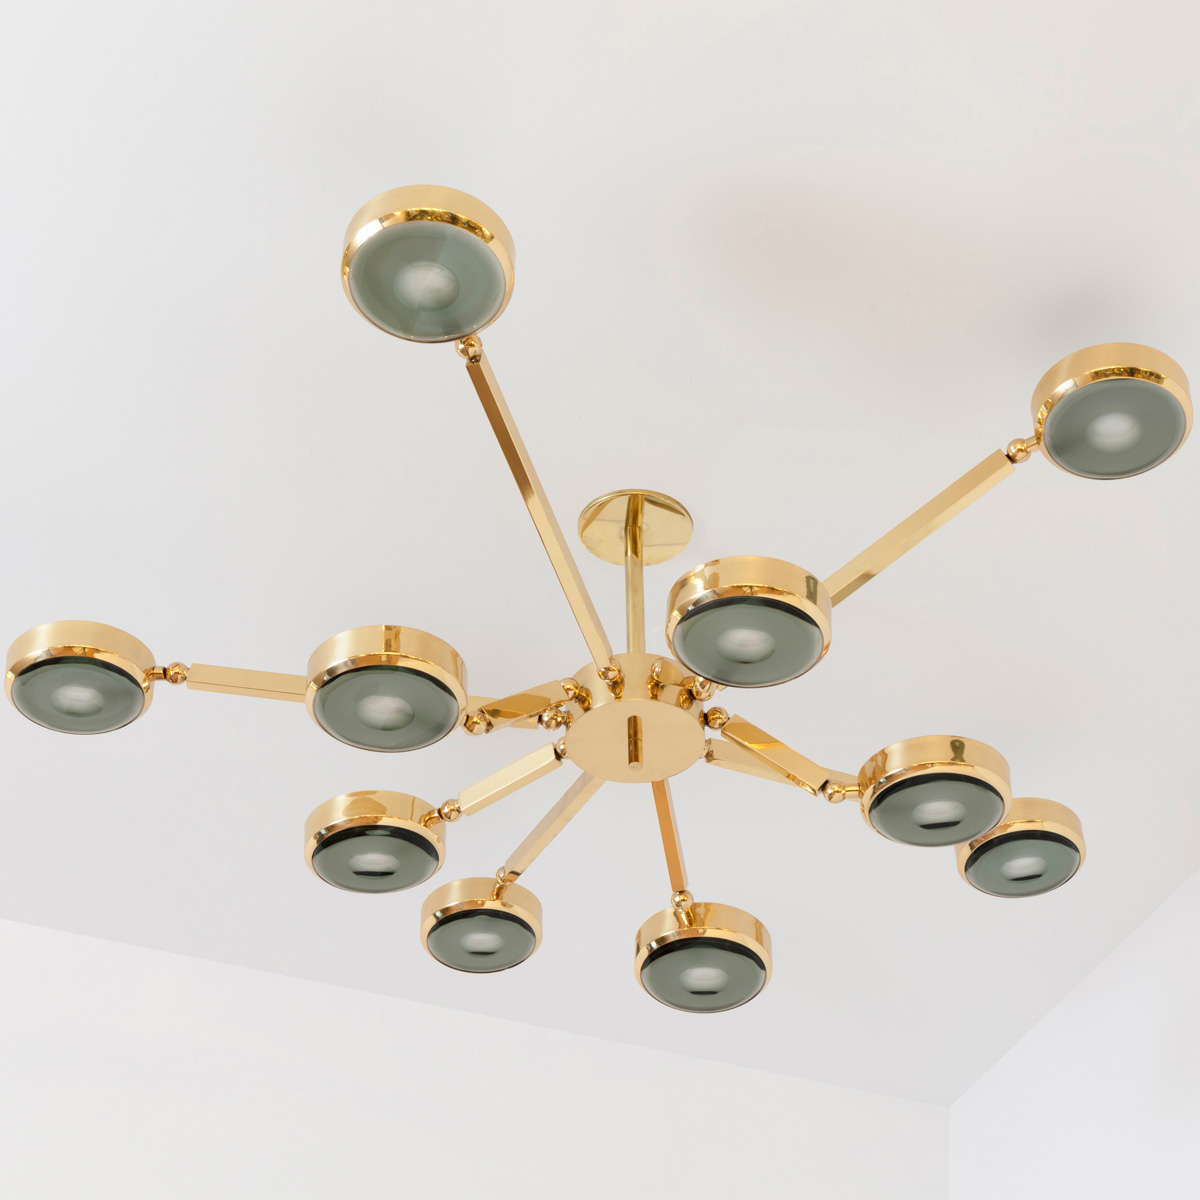 Oculus ceiling light by Gaspare Asaro